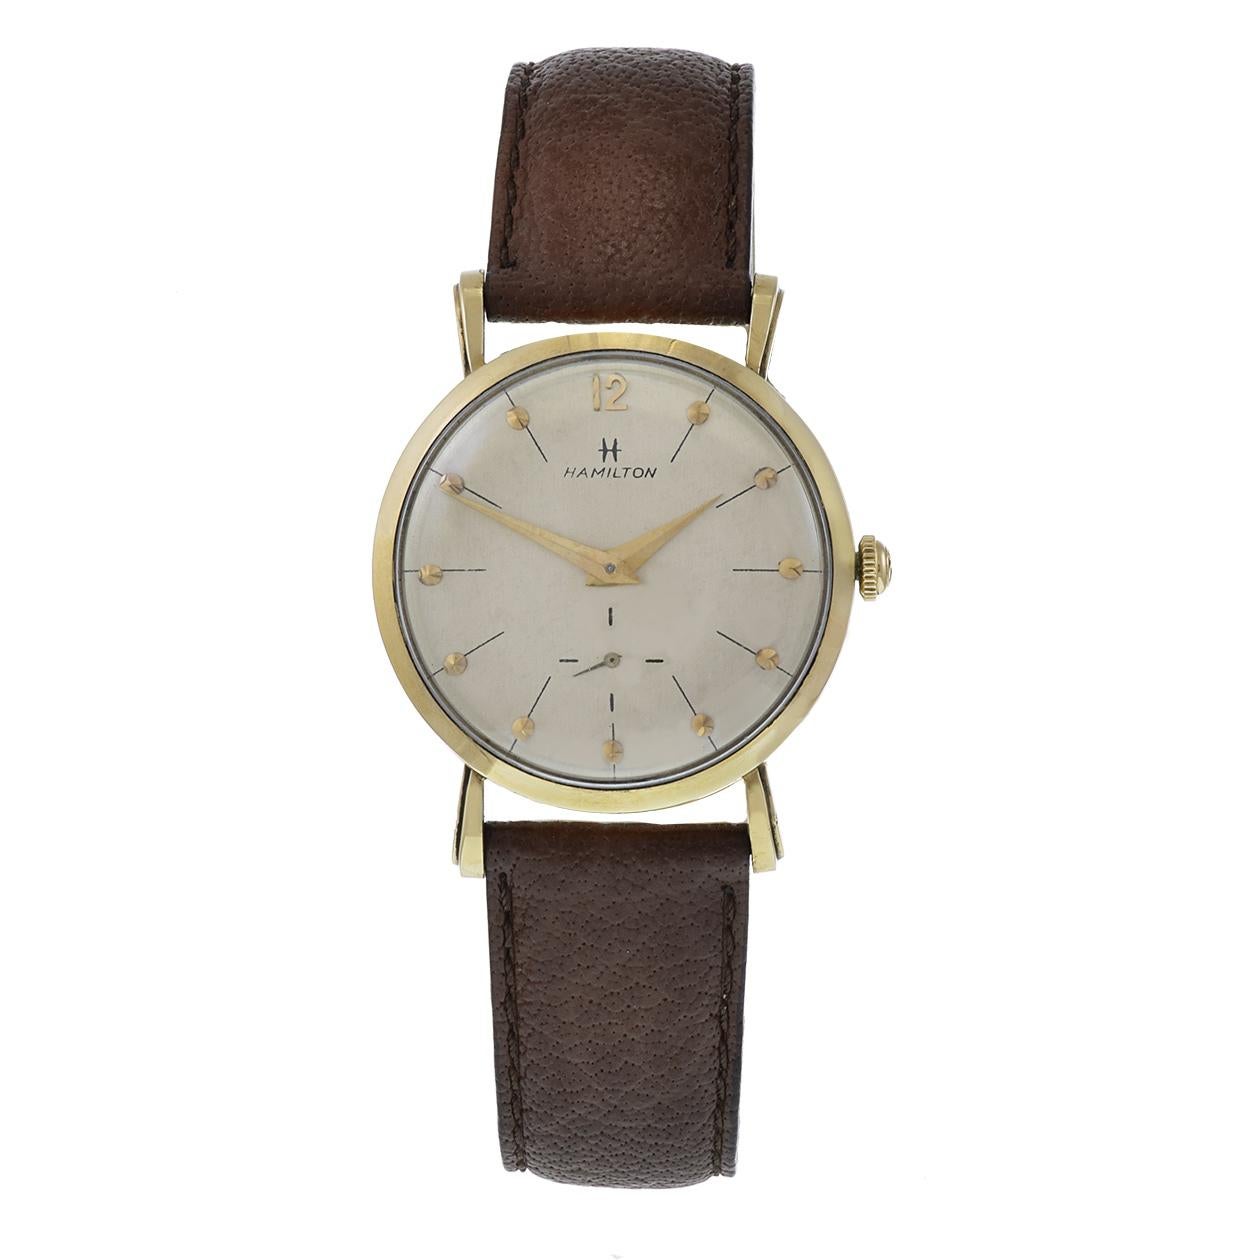 Introducing the timeless elegance of the Hamilton 1950s 14kt Gold 33mm Round Case with Extended Lugs Watch. This vintage masterpiece exudes sophistication with its classic round case crafted from luxurious 14kt gold, featuring extended lugs that add